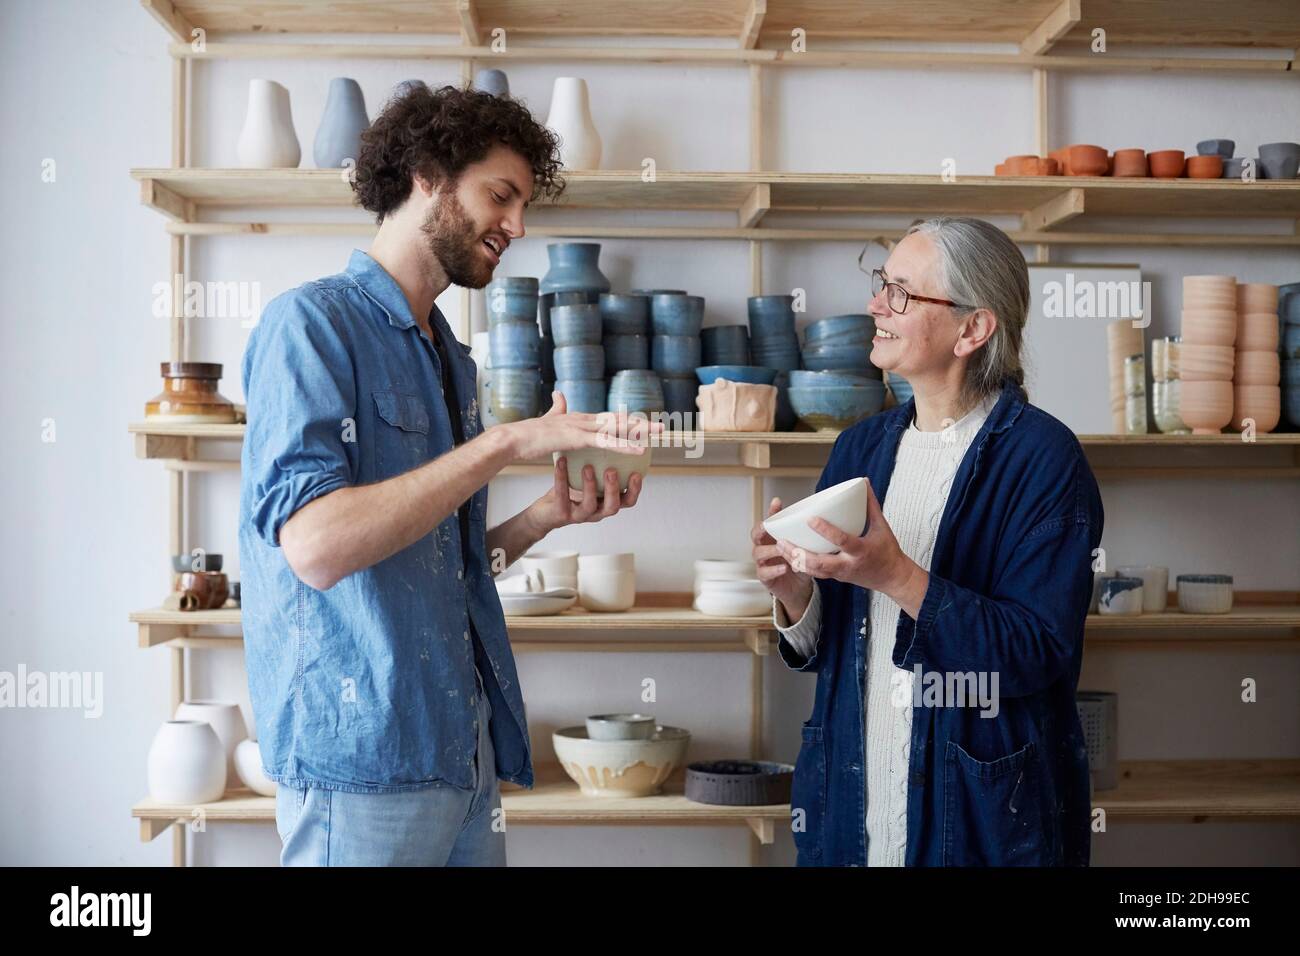 Man and woman discussing over bowl in pottery class Stock Photo